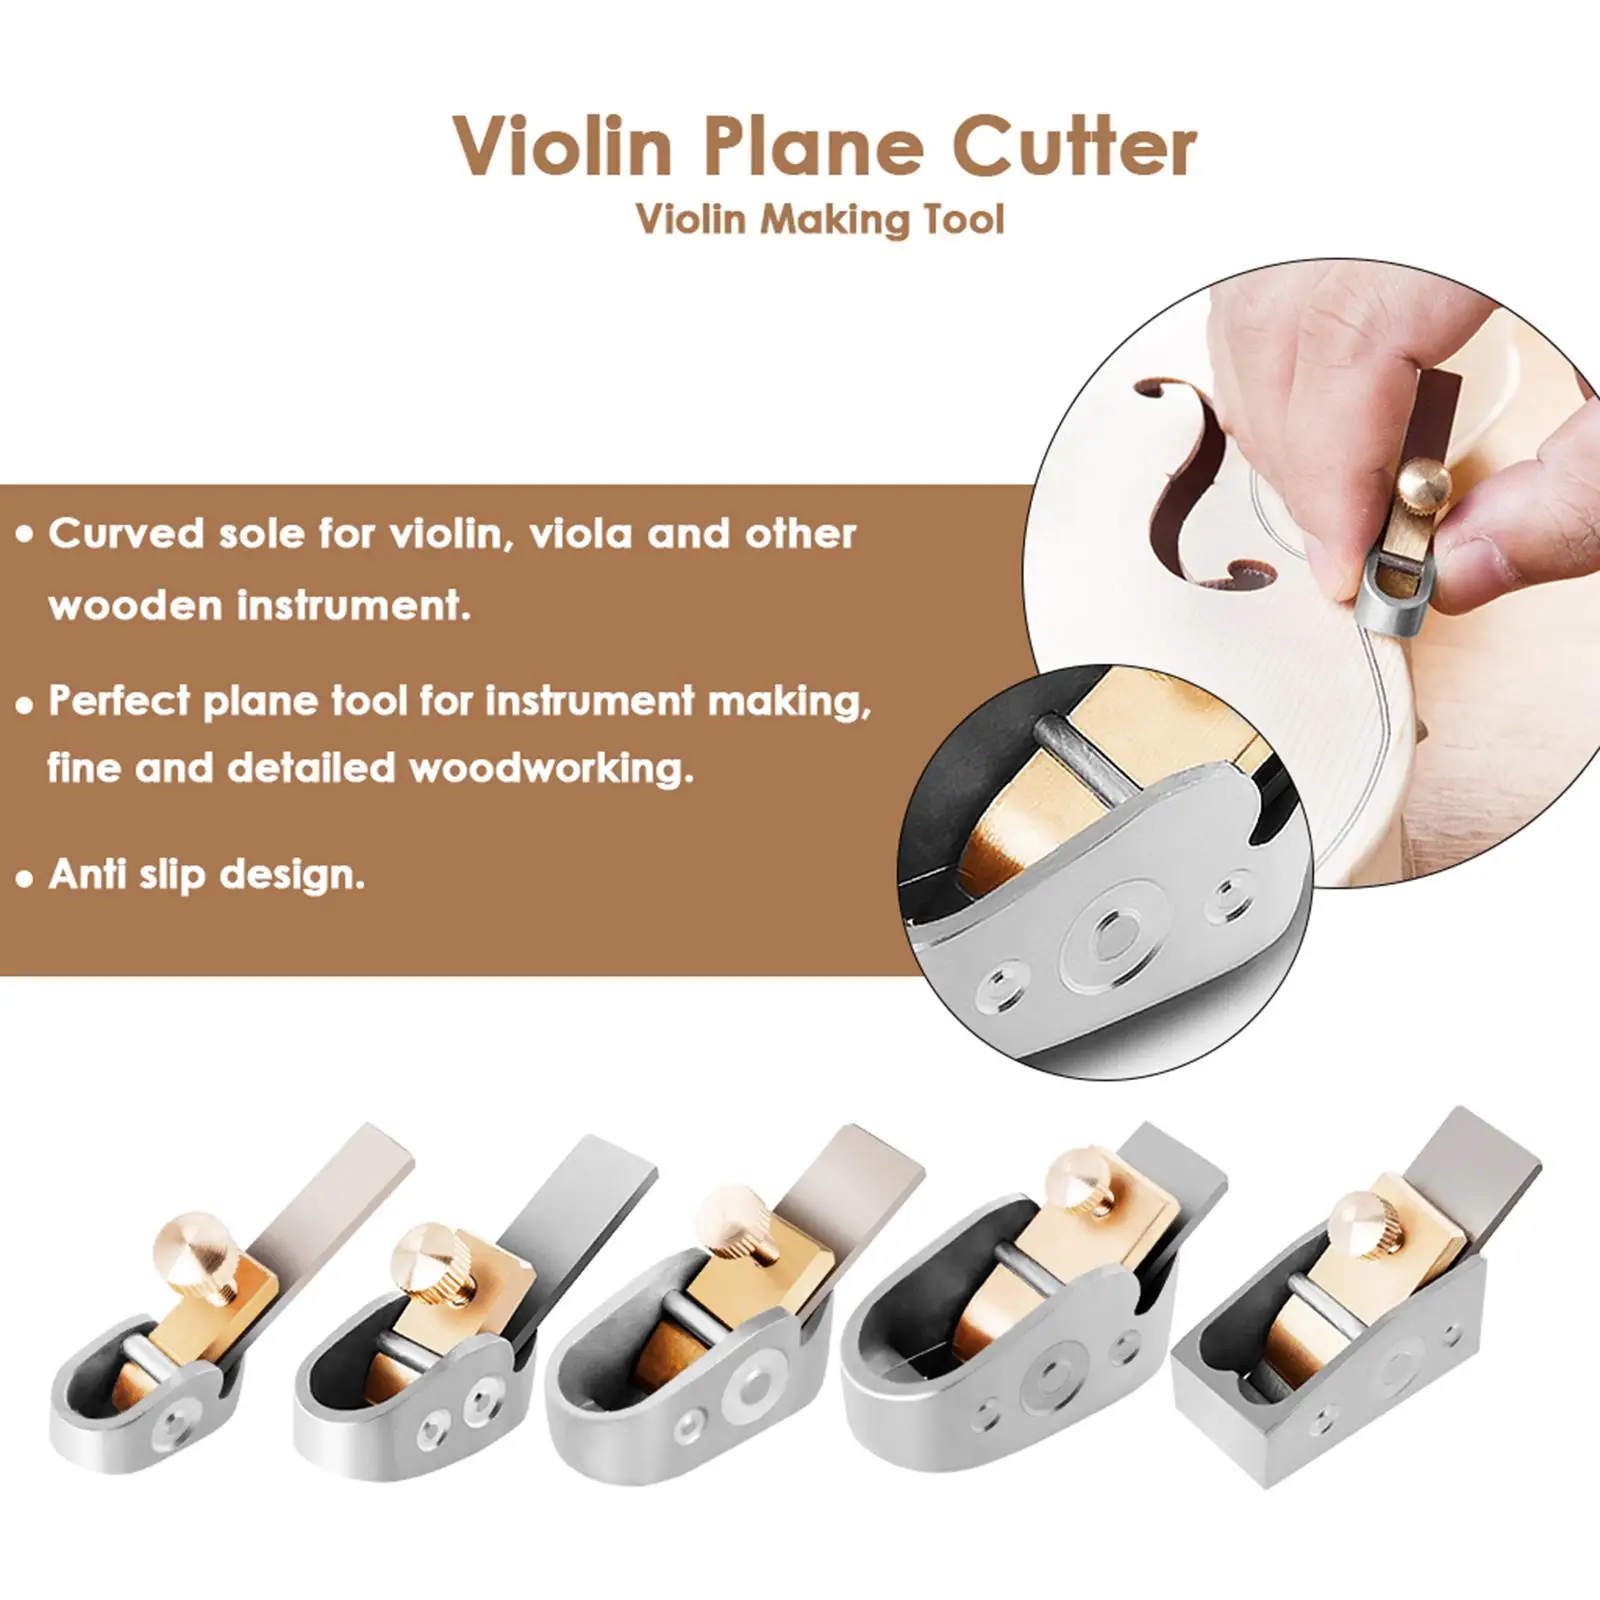 Violin Thumb Planer Cutting Machine Luthier Tool for Wooden Instrument C Woodworking Planer Cutter Curved Sole Flat Bottom